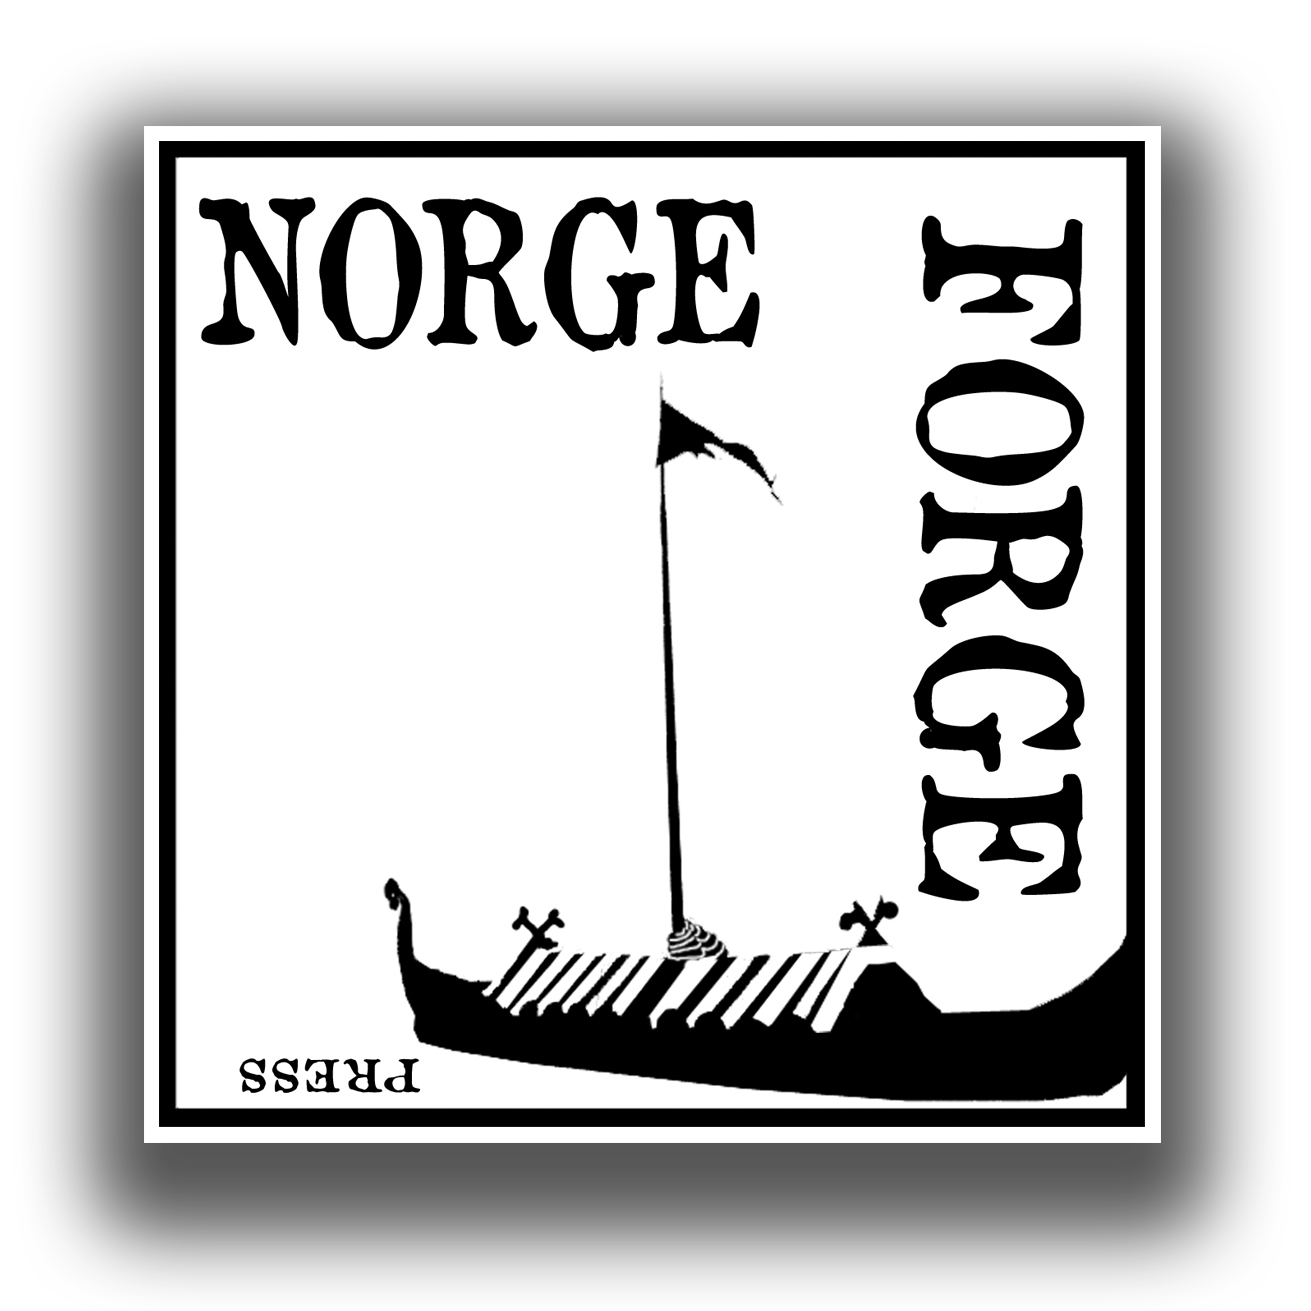 Norge Forge Logo and Button